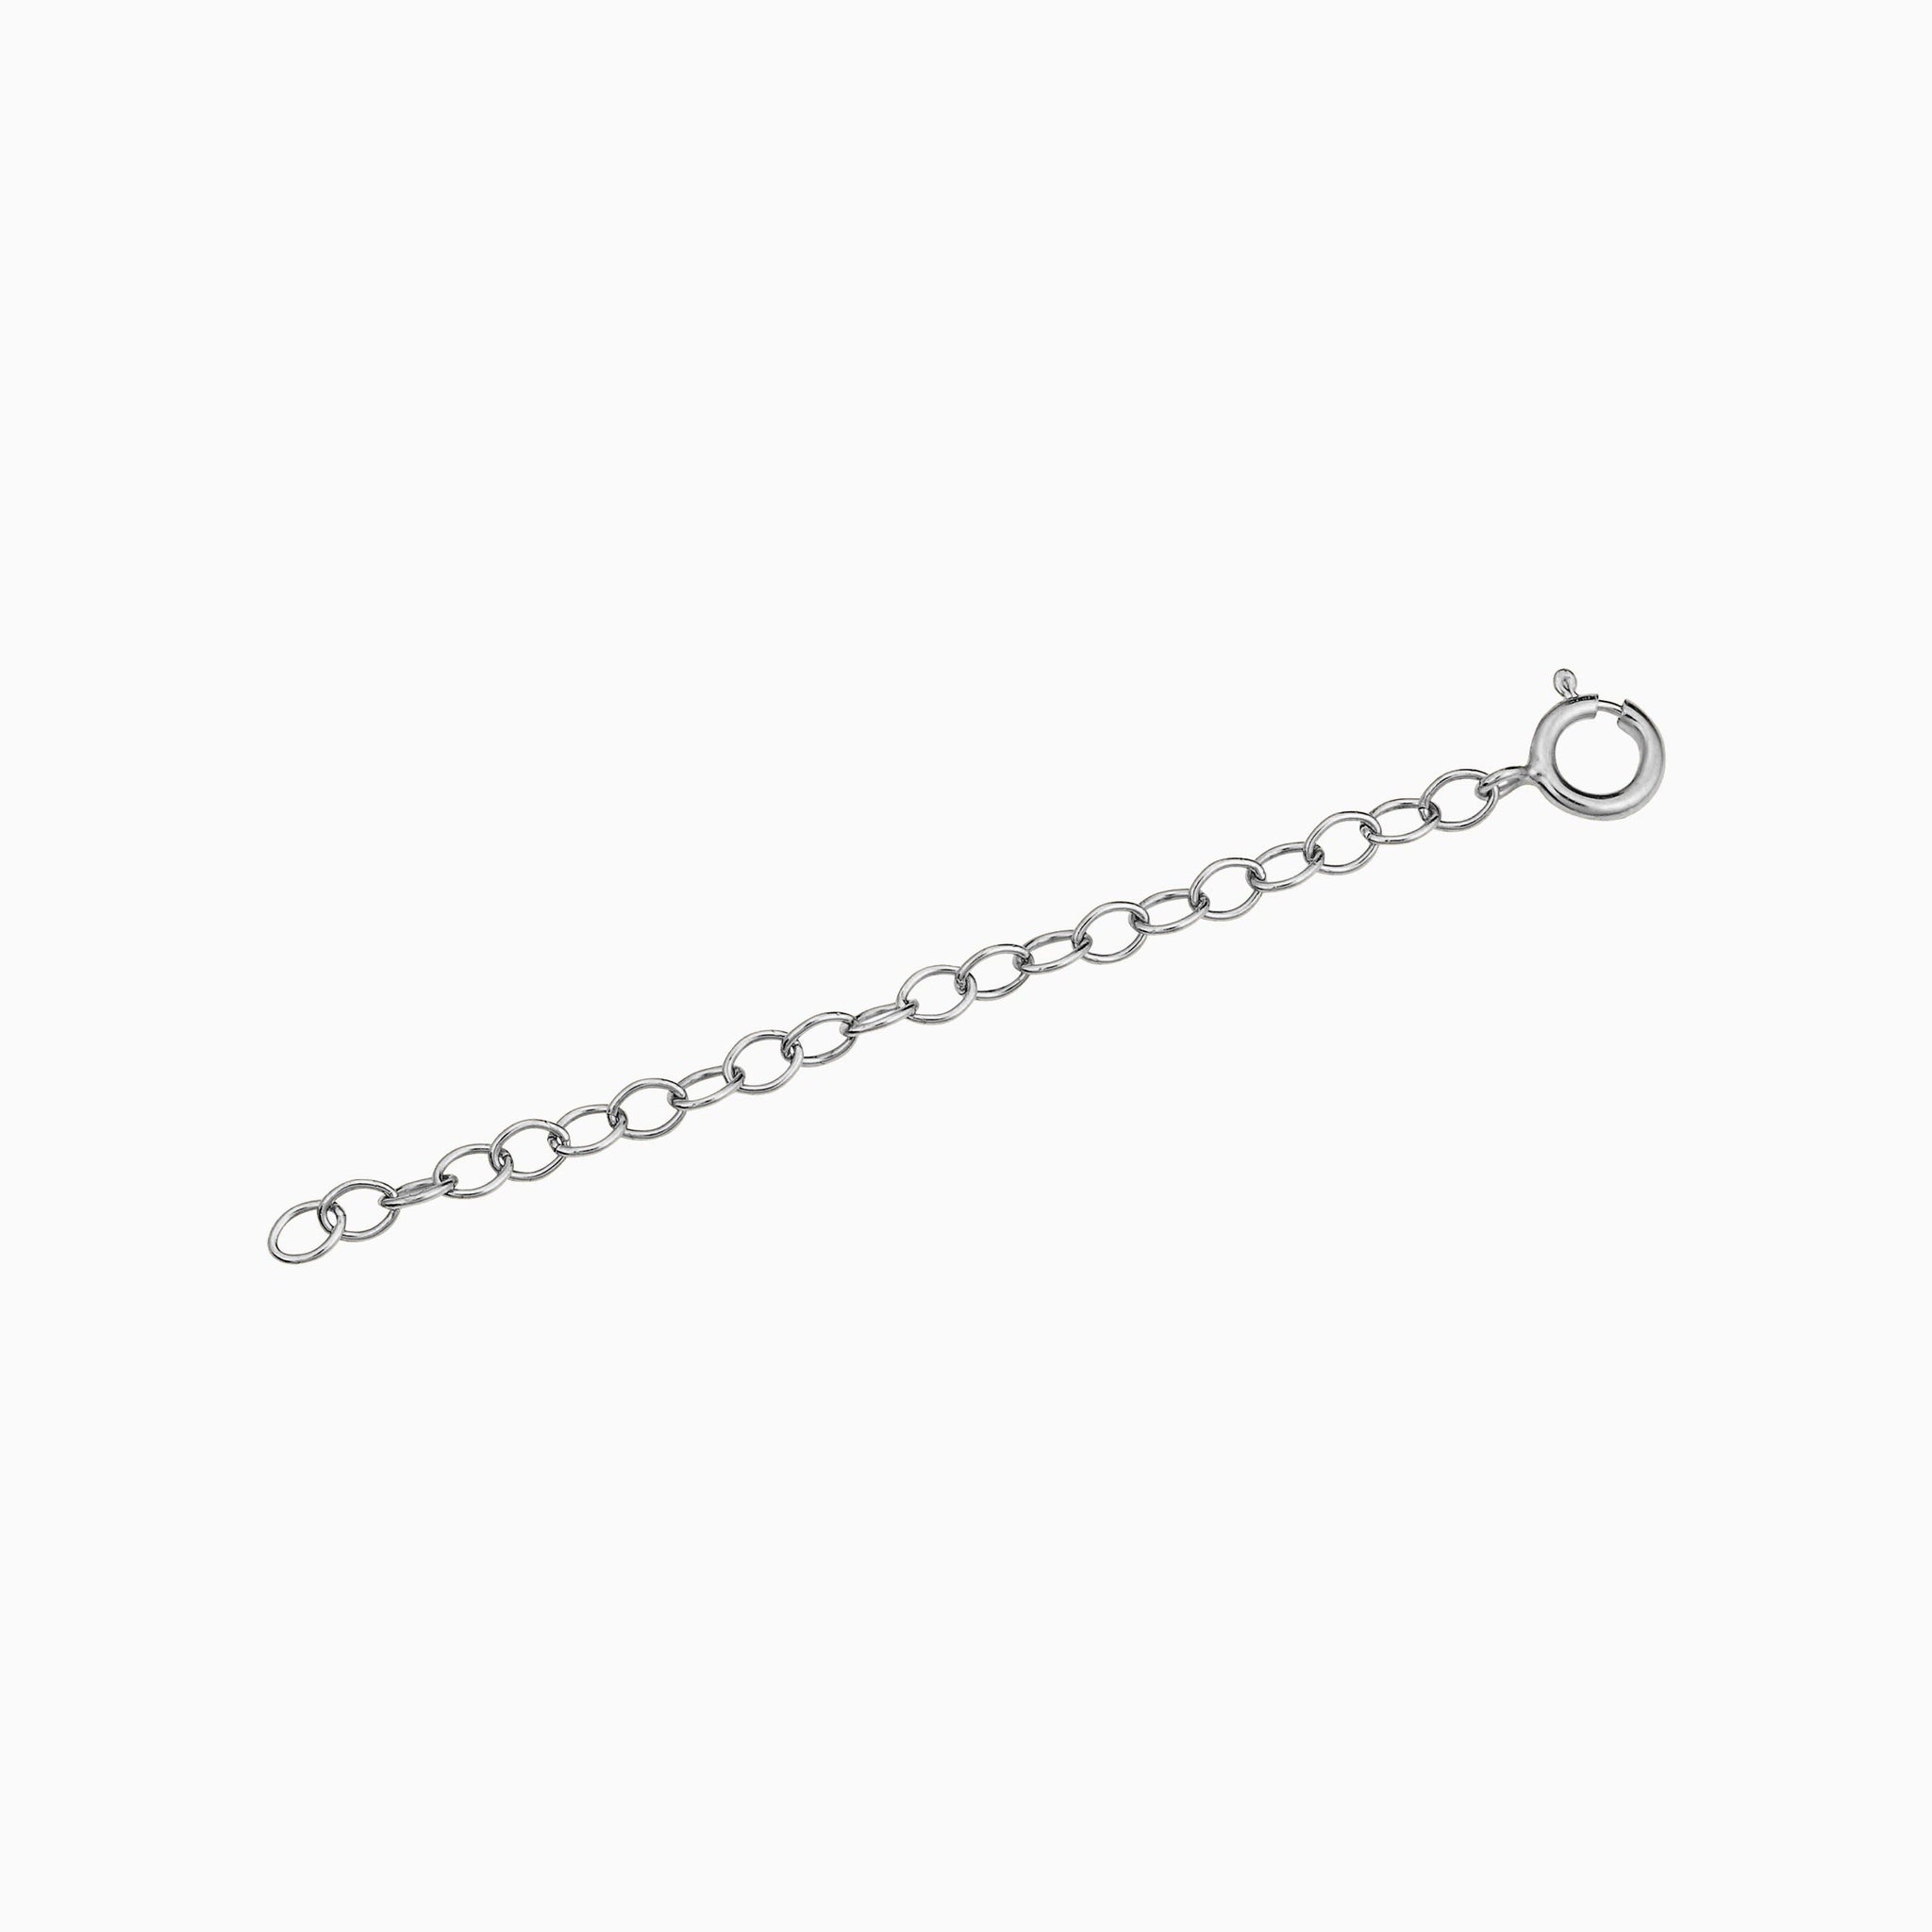 Solid Sterling Silver Cable Chain Extender - 2 (1 piece)